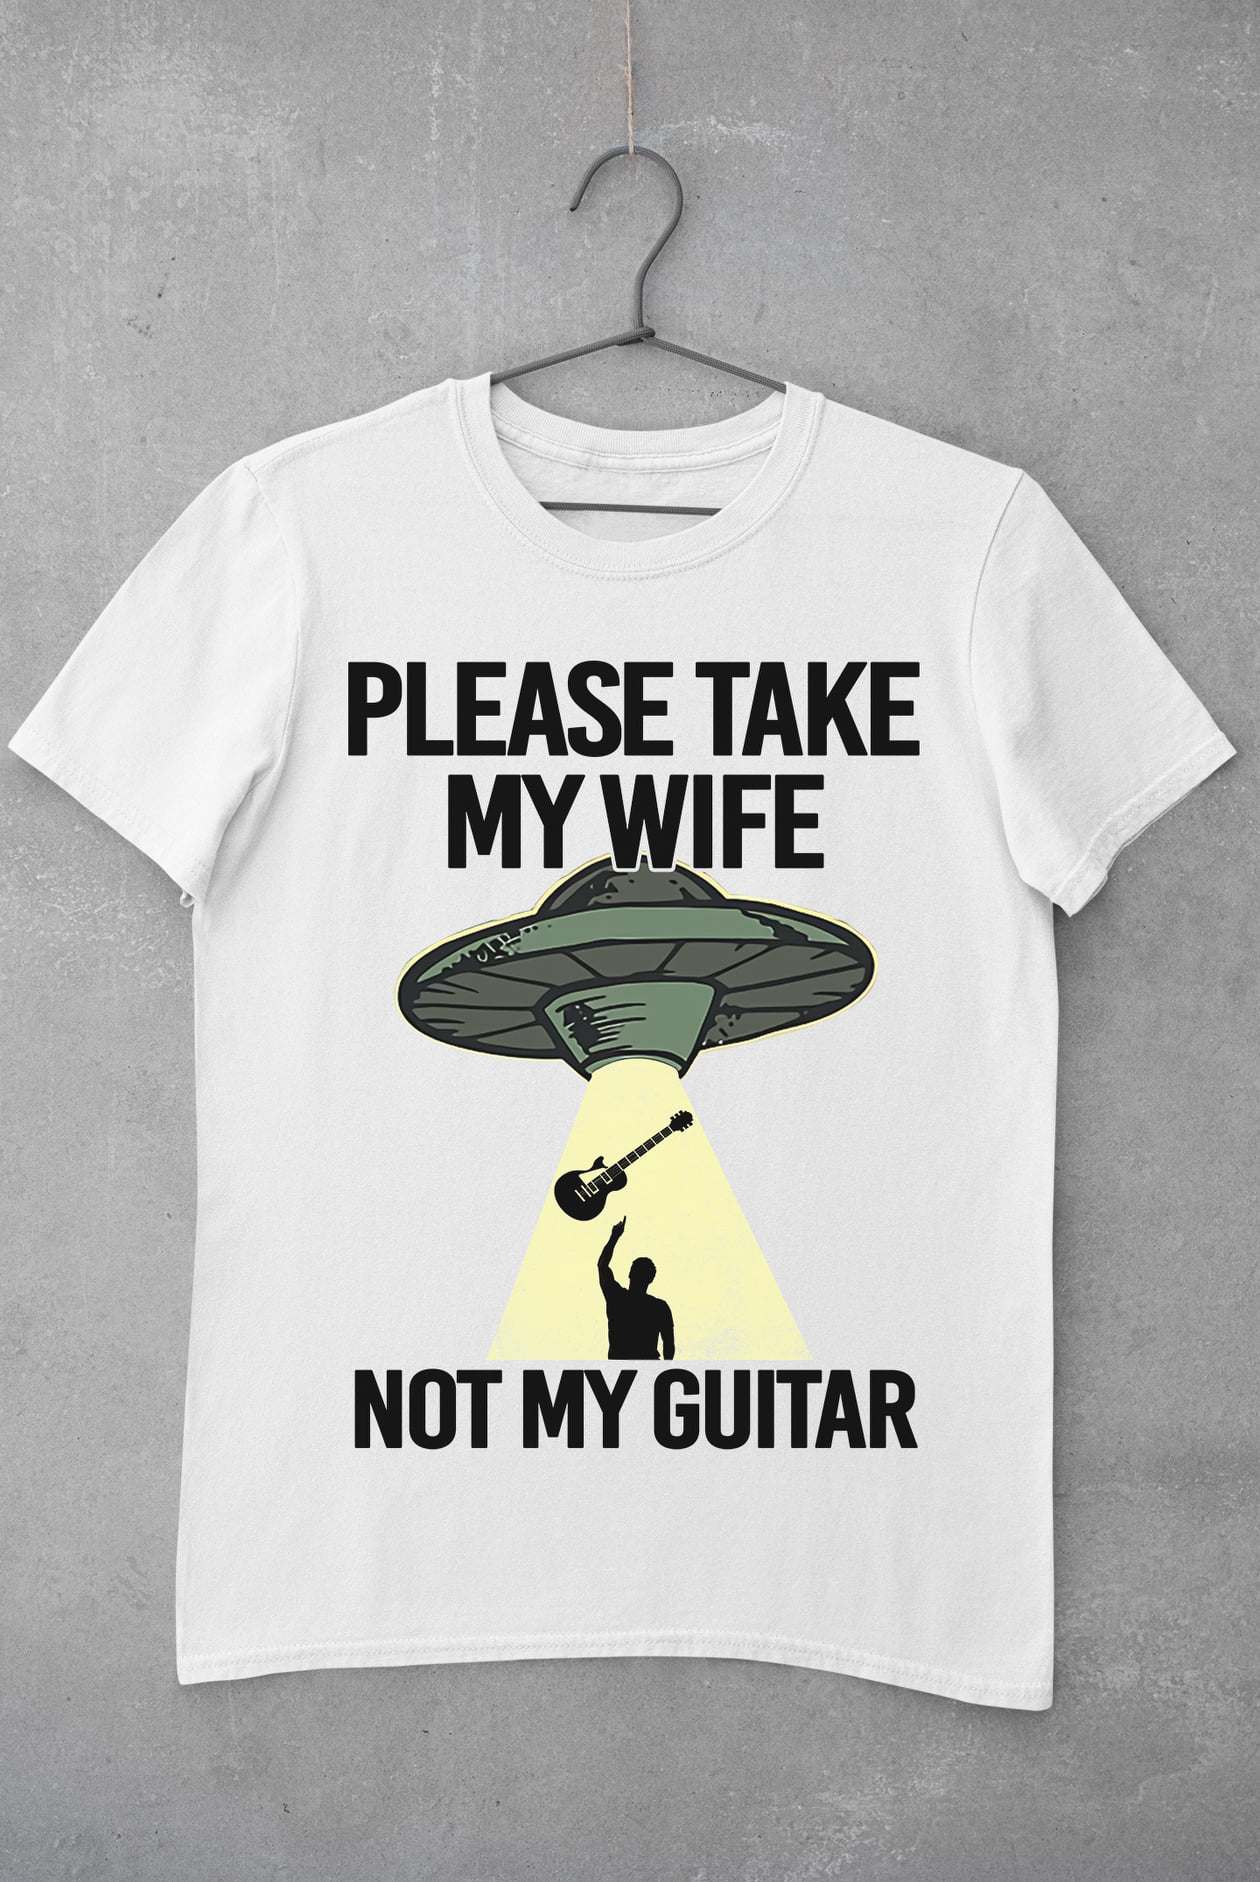 Please take my wife not my guitar - Guitar versus unidentified found object